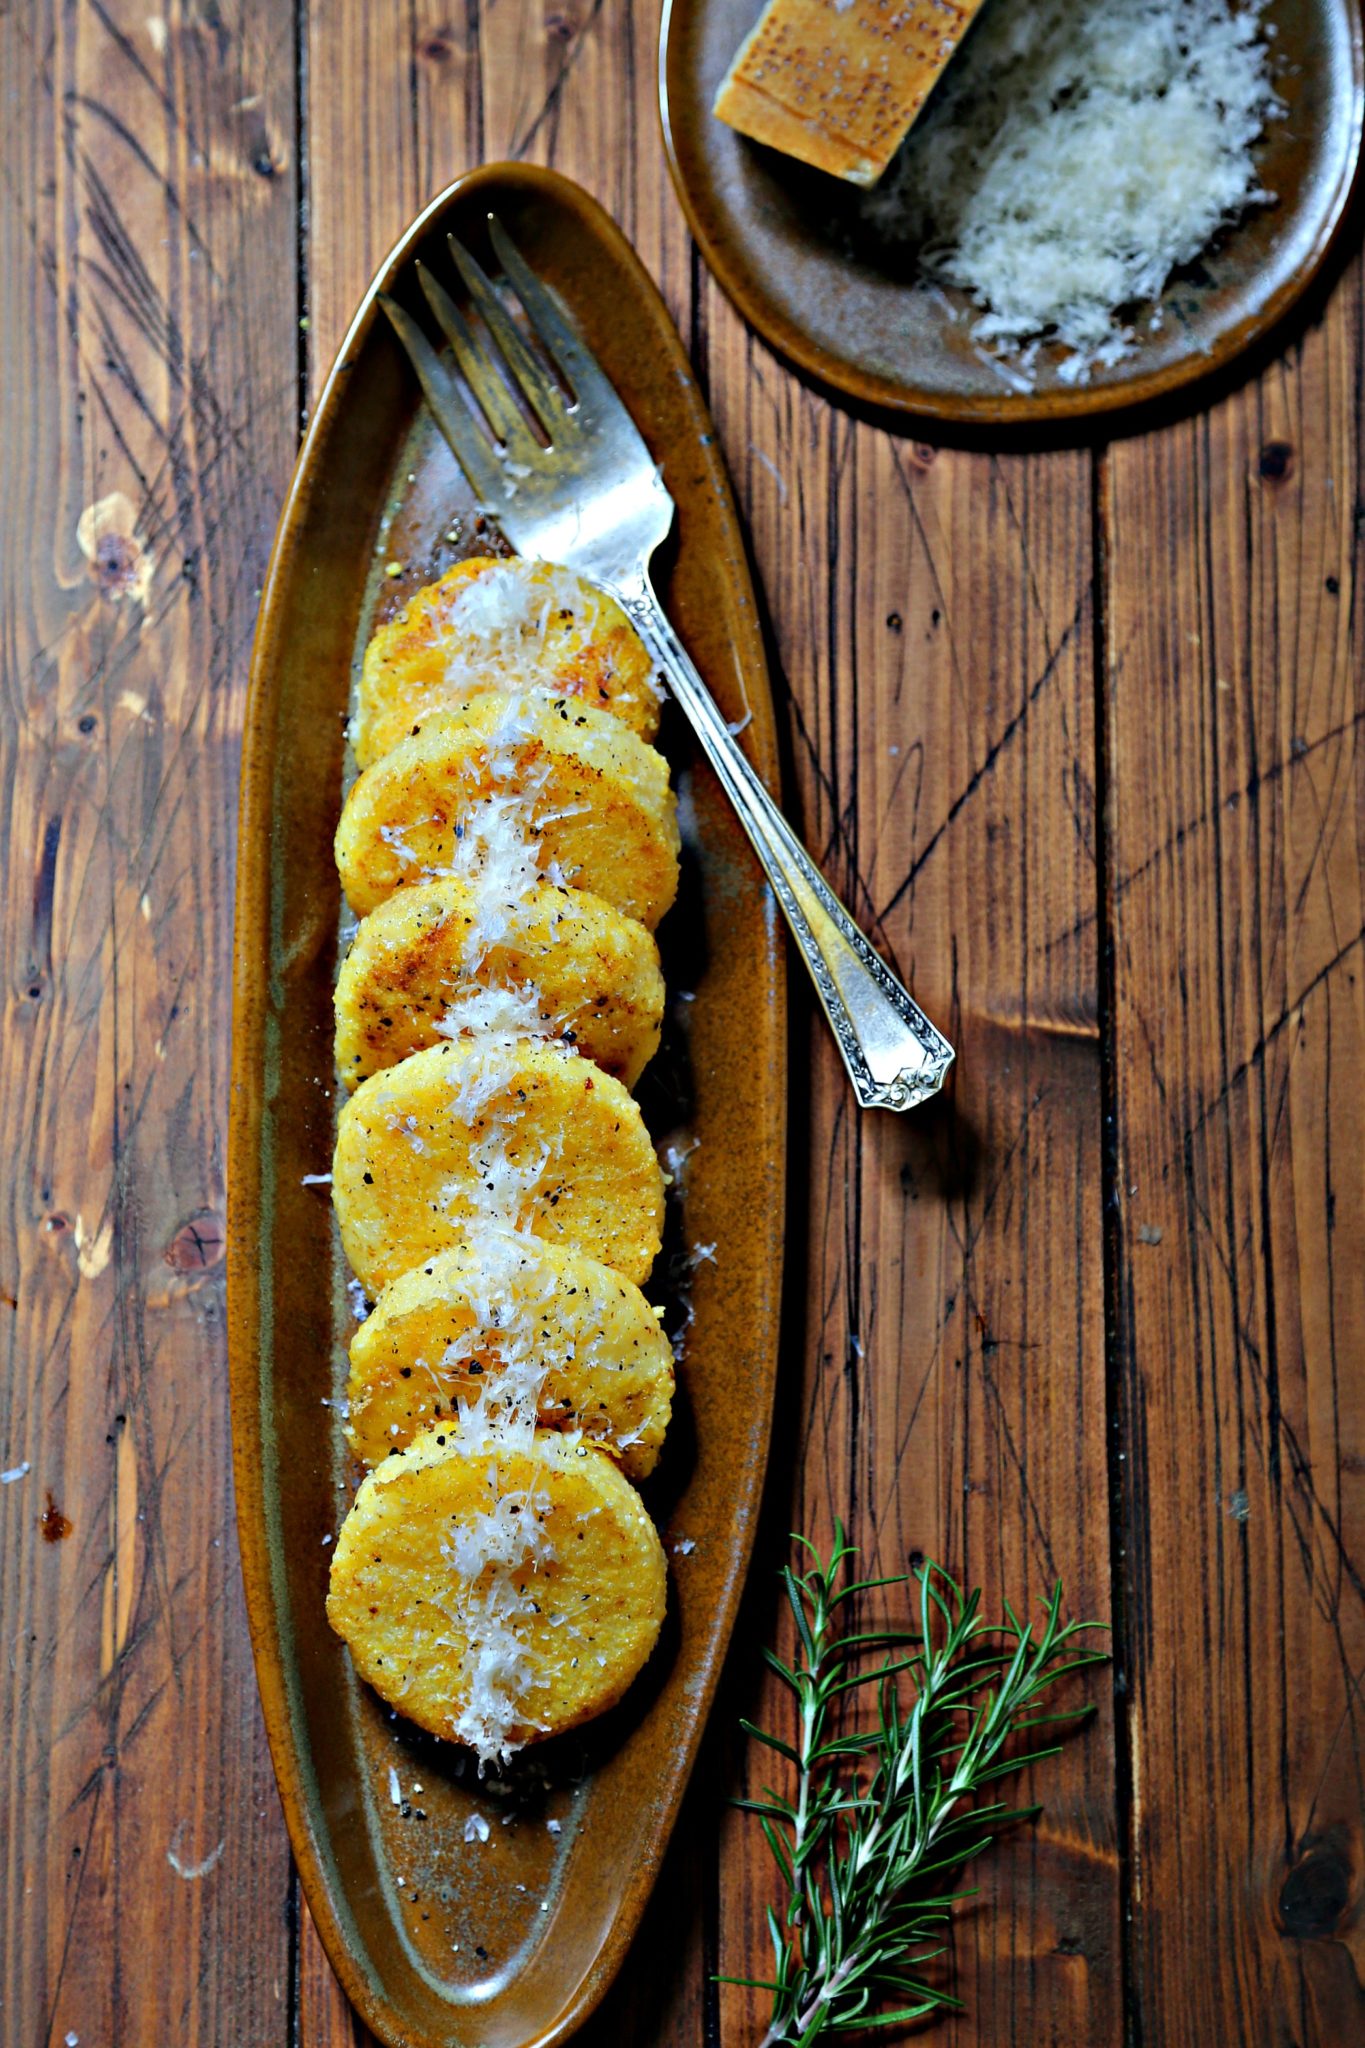 Polenta Cakes on brown platter with cheese and wood background via bell'alimento